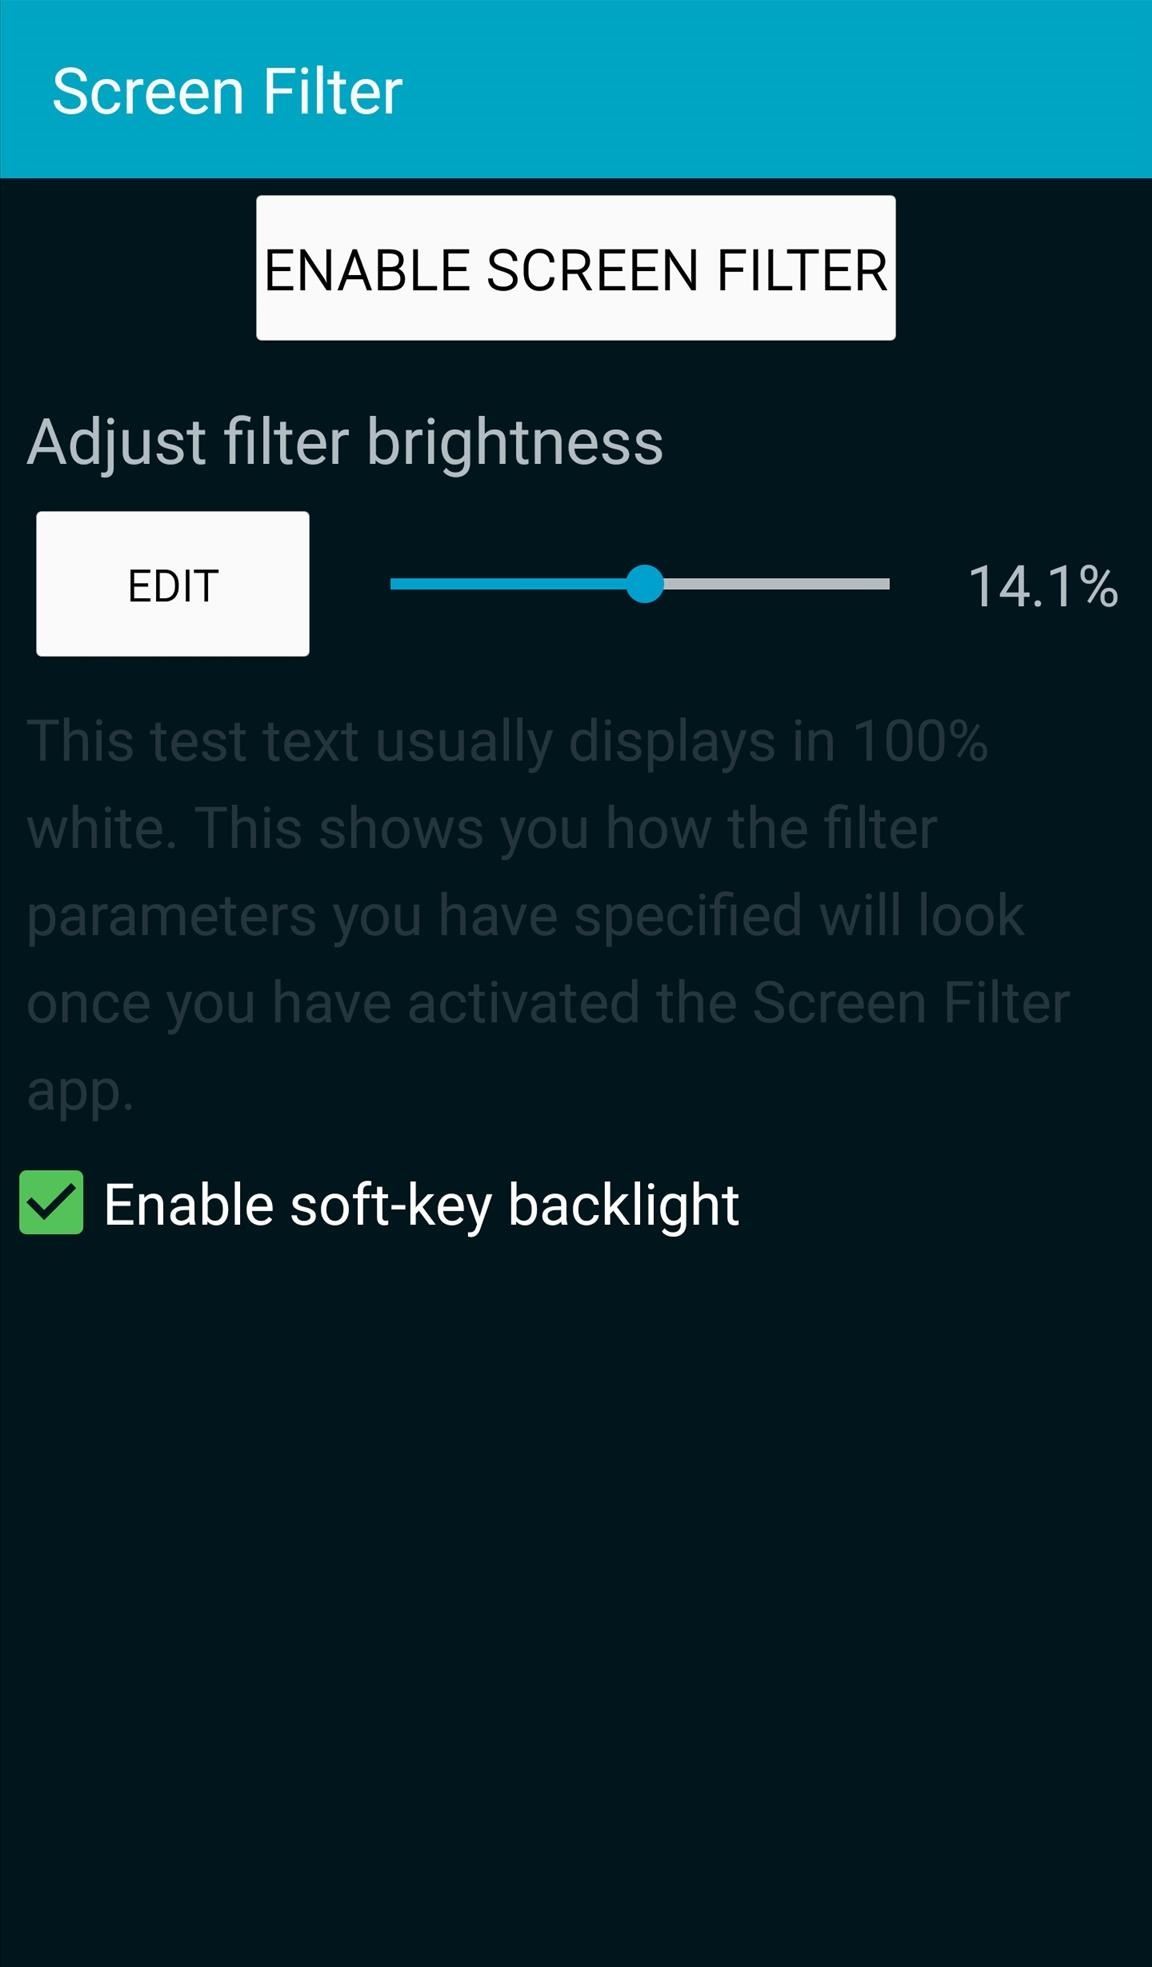 Screen Too Bright at Night? These Apps Dim Your Display Below '0% Brightness'